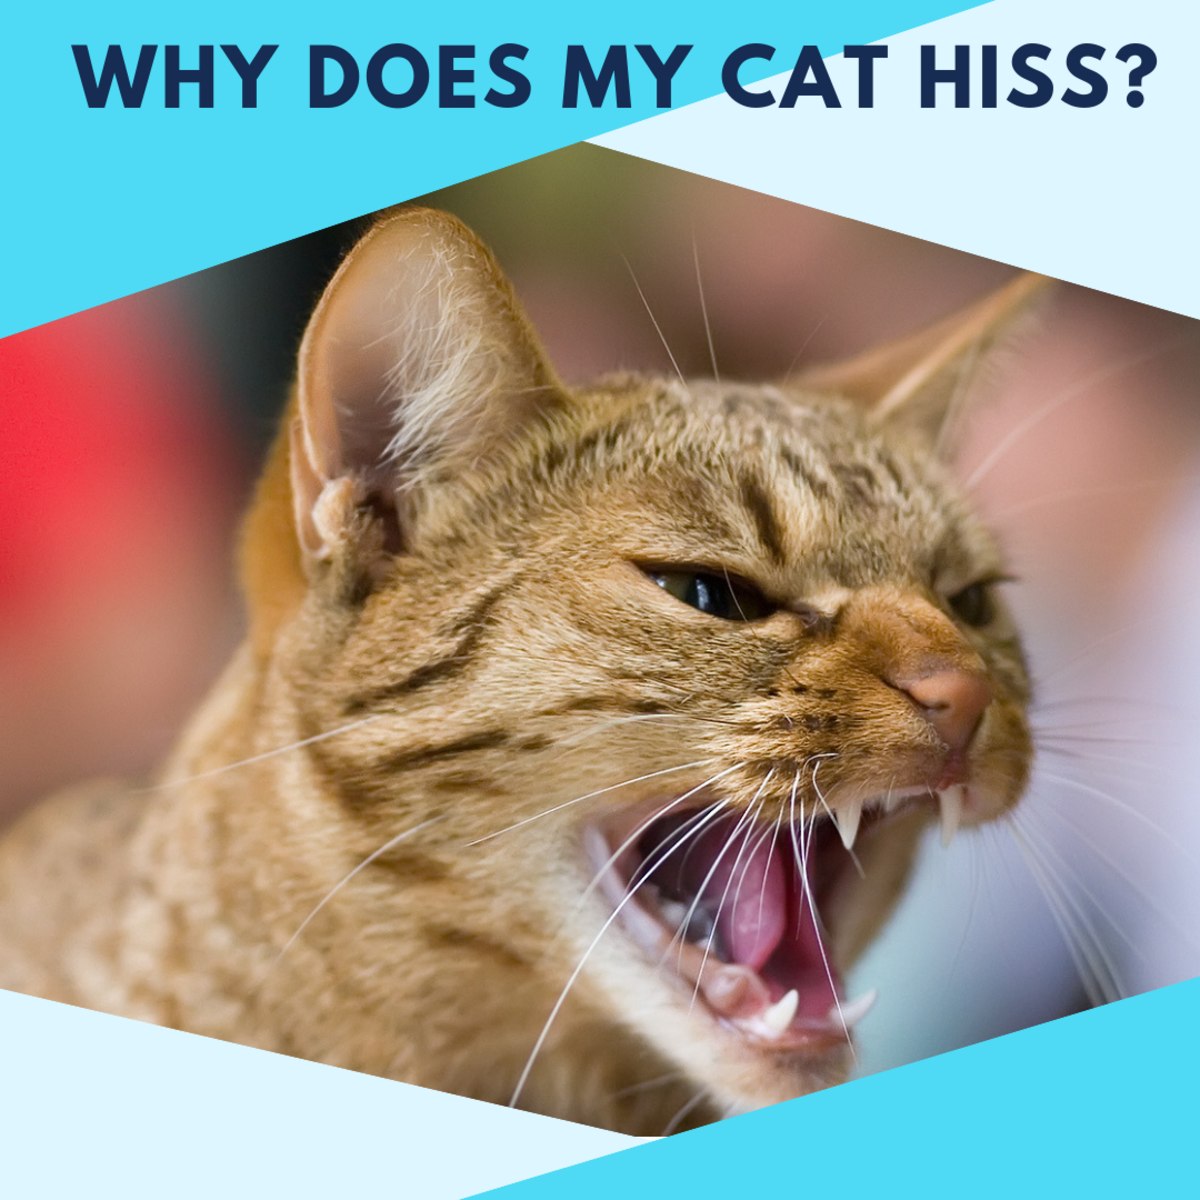 Why Do Cats Hiss for No Reason?